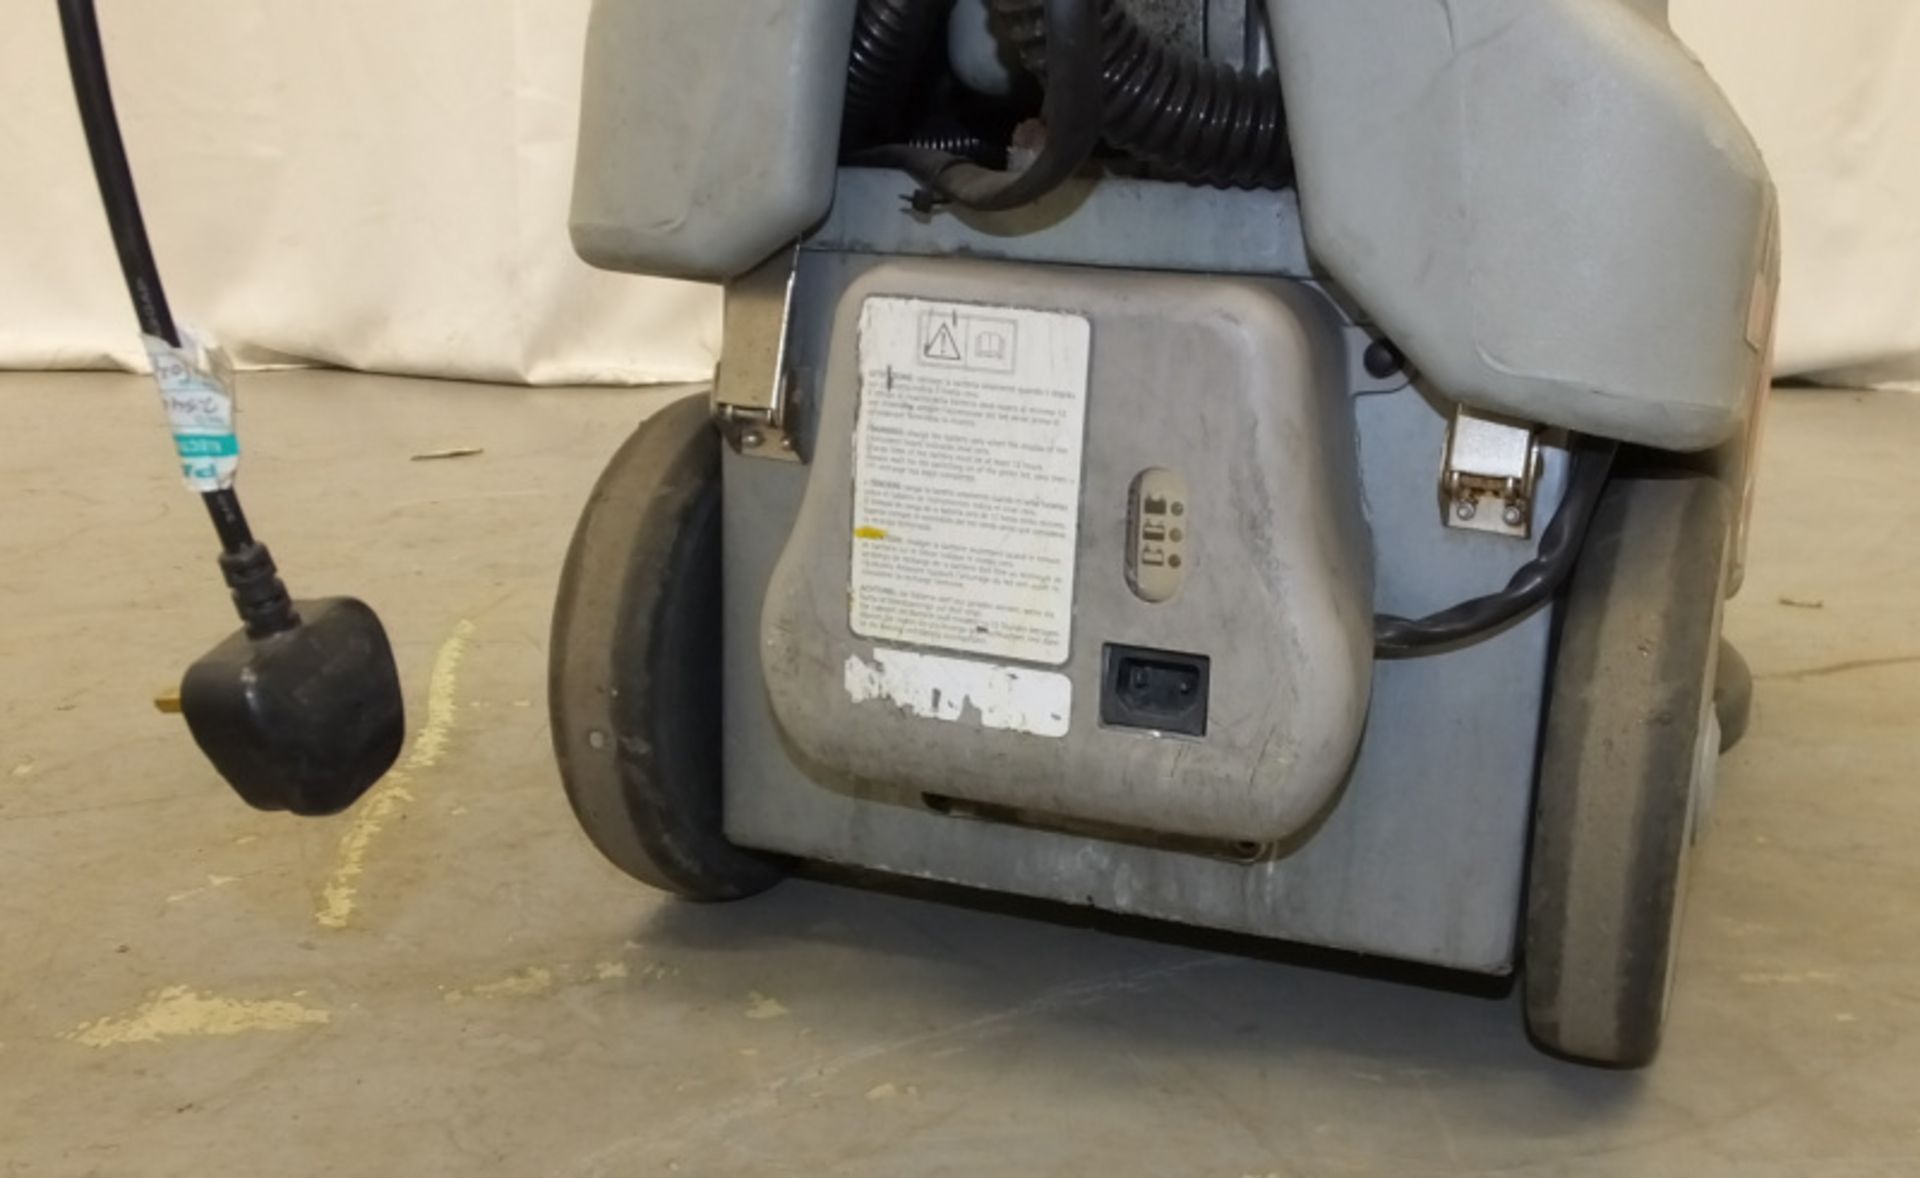 Comac Vispa 35B Floor Scrubber - powers up - functionality untested - Image 6 of 8